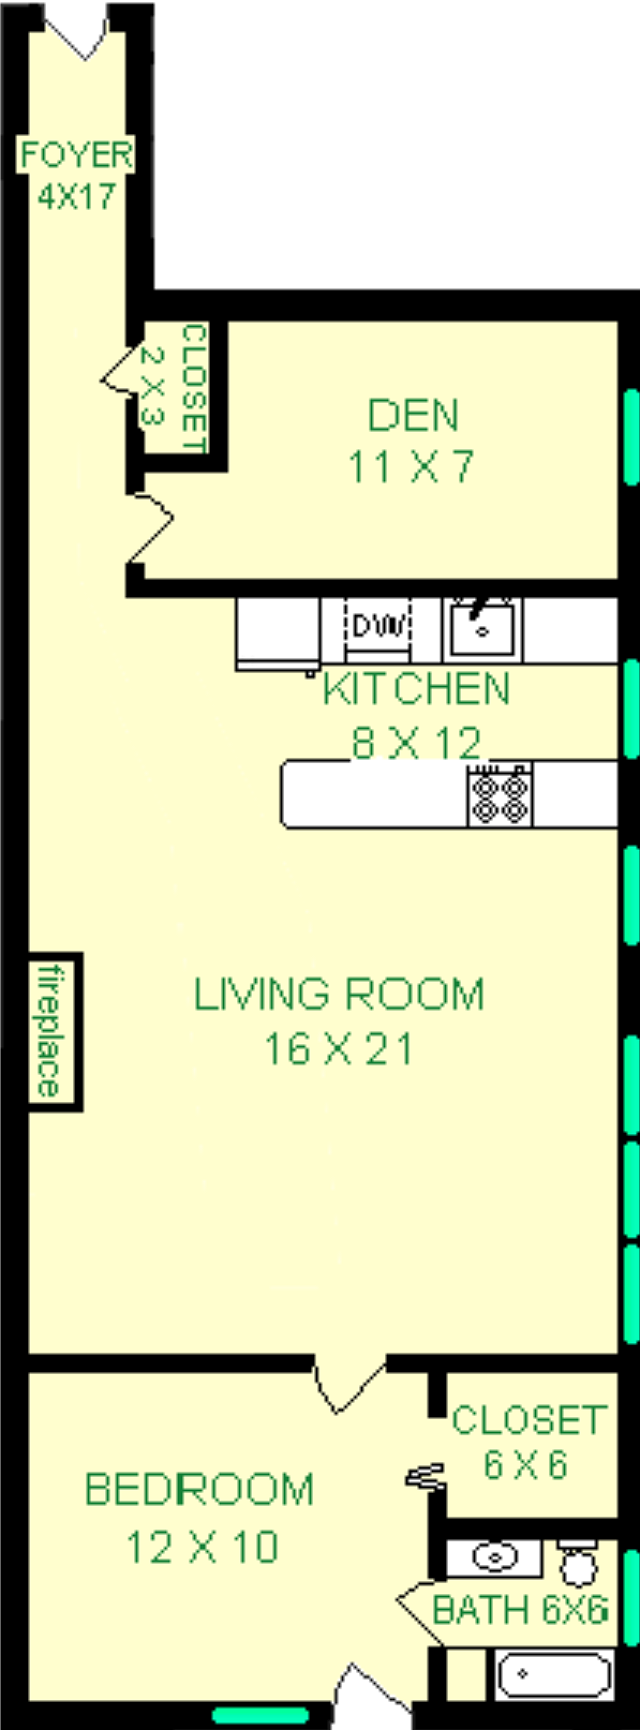 Chestnut One Bedroom floorplan shows roughly 915 square feet, with a bedroom, living room, bathroom, closet, kitchen, den and a foyer.